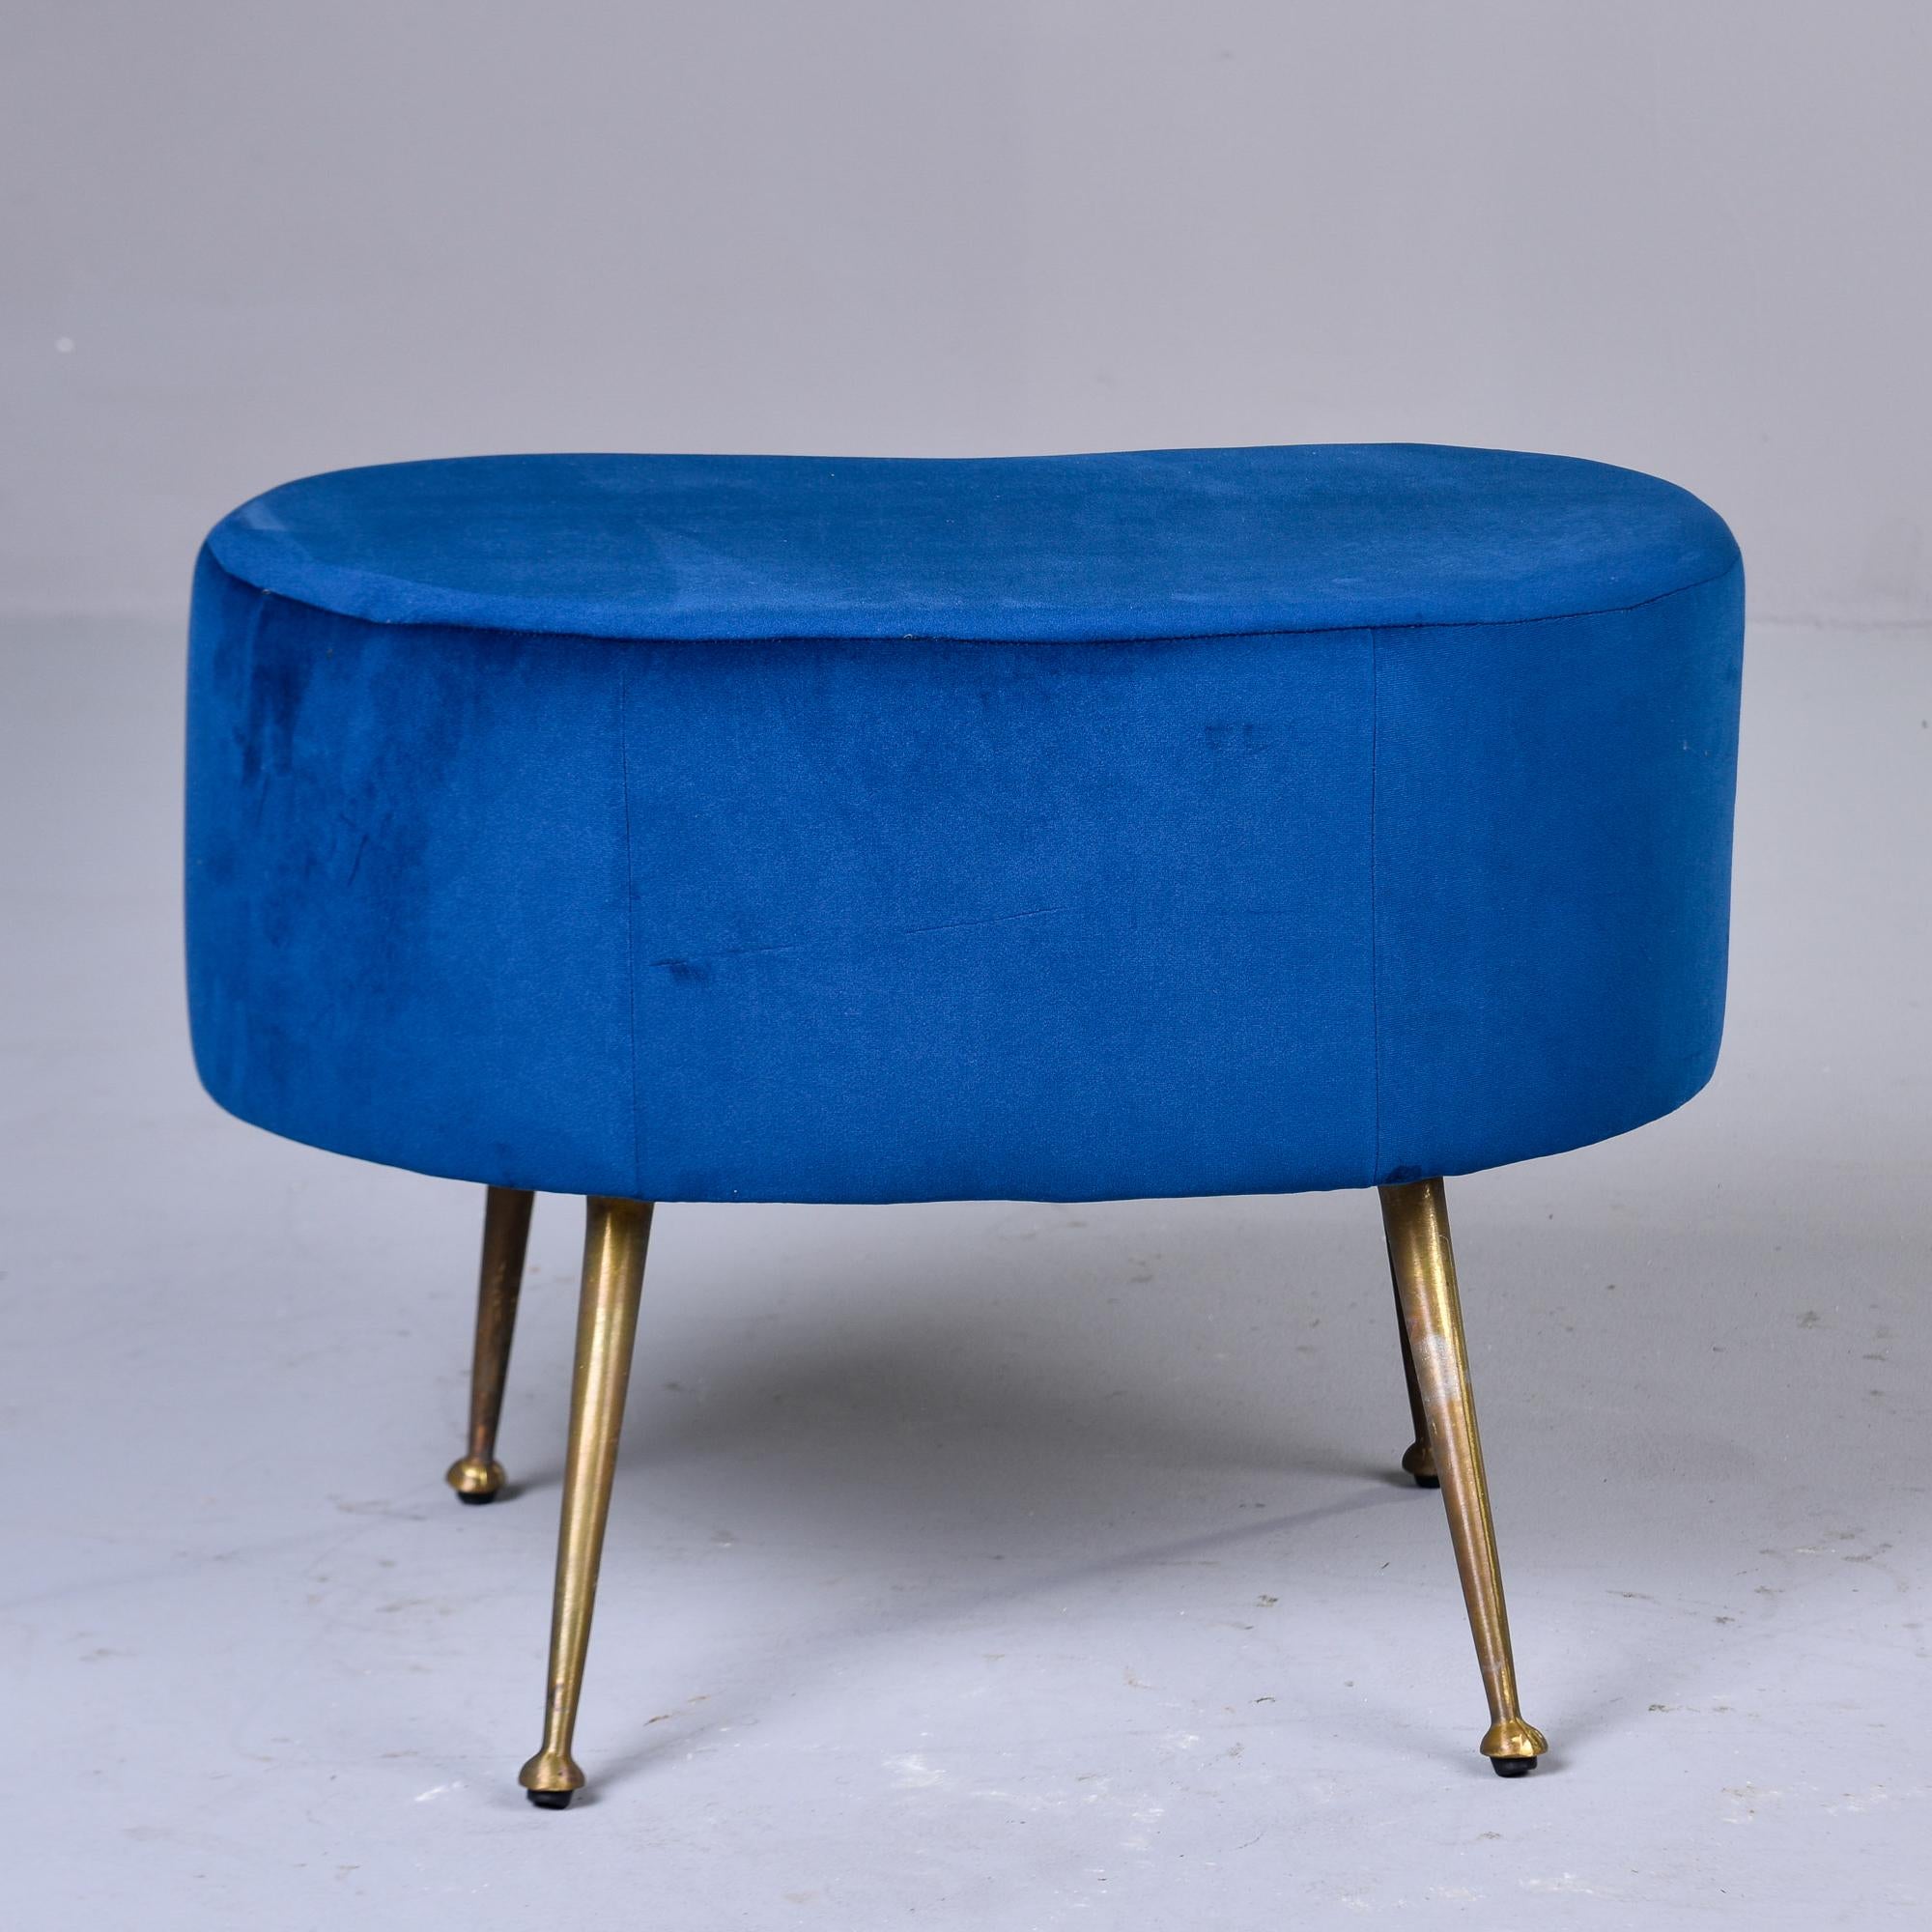 Italian Mid Century Blue Kidney Shaped Stool with Brass Legs For Sale 1